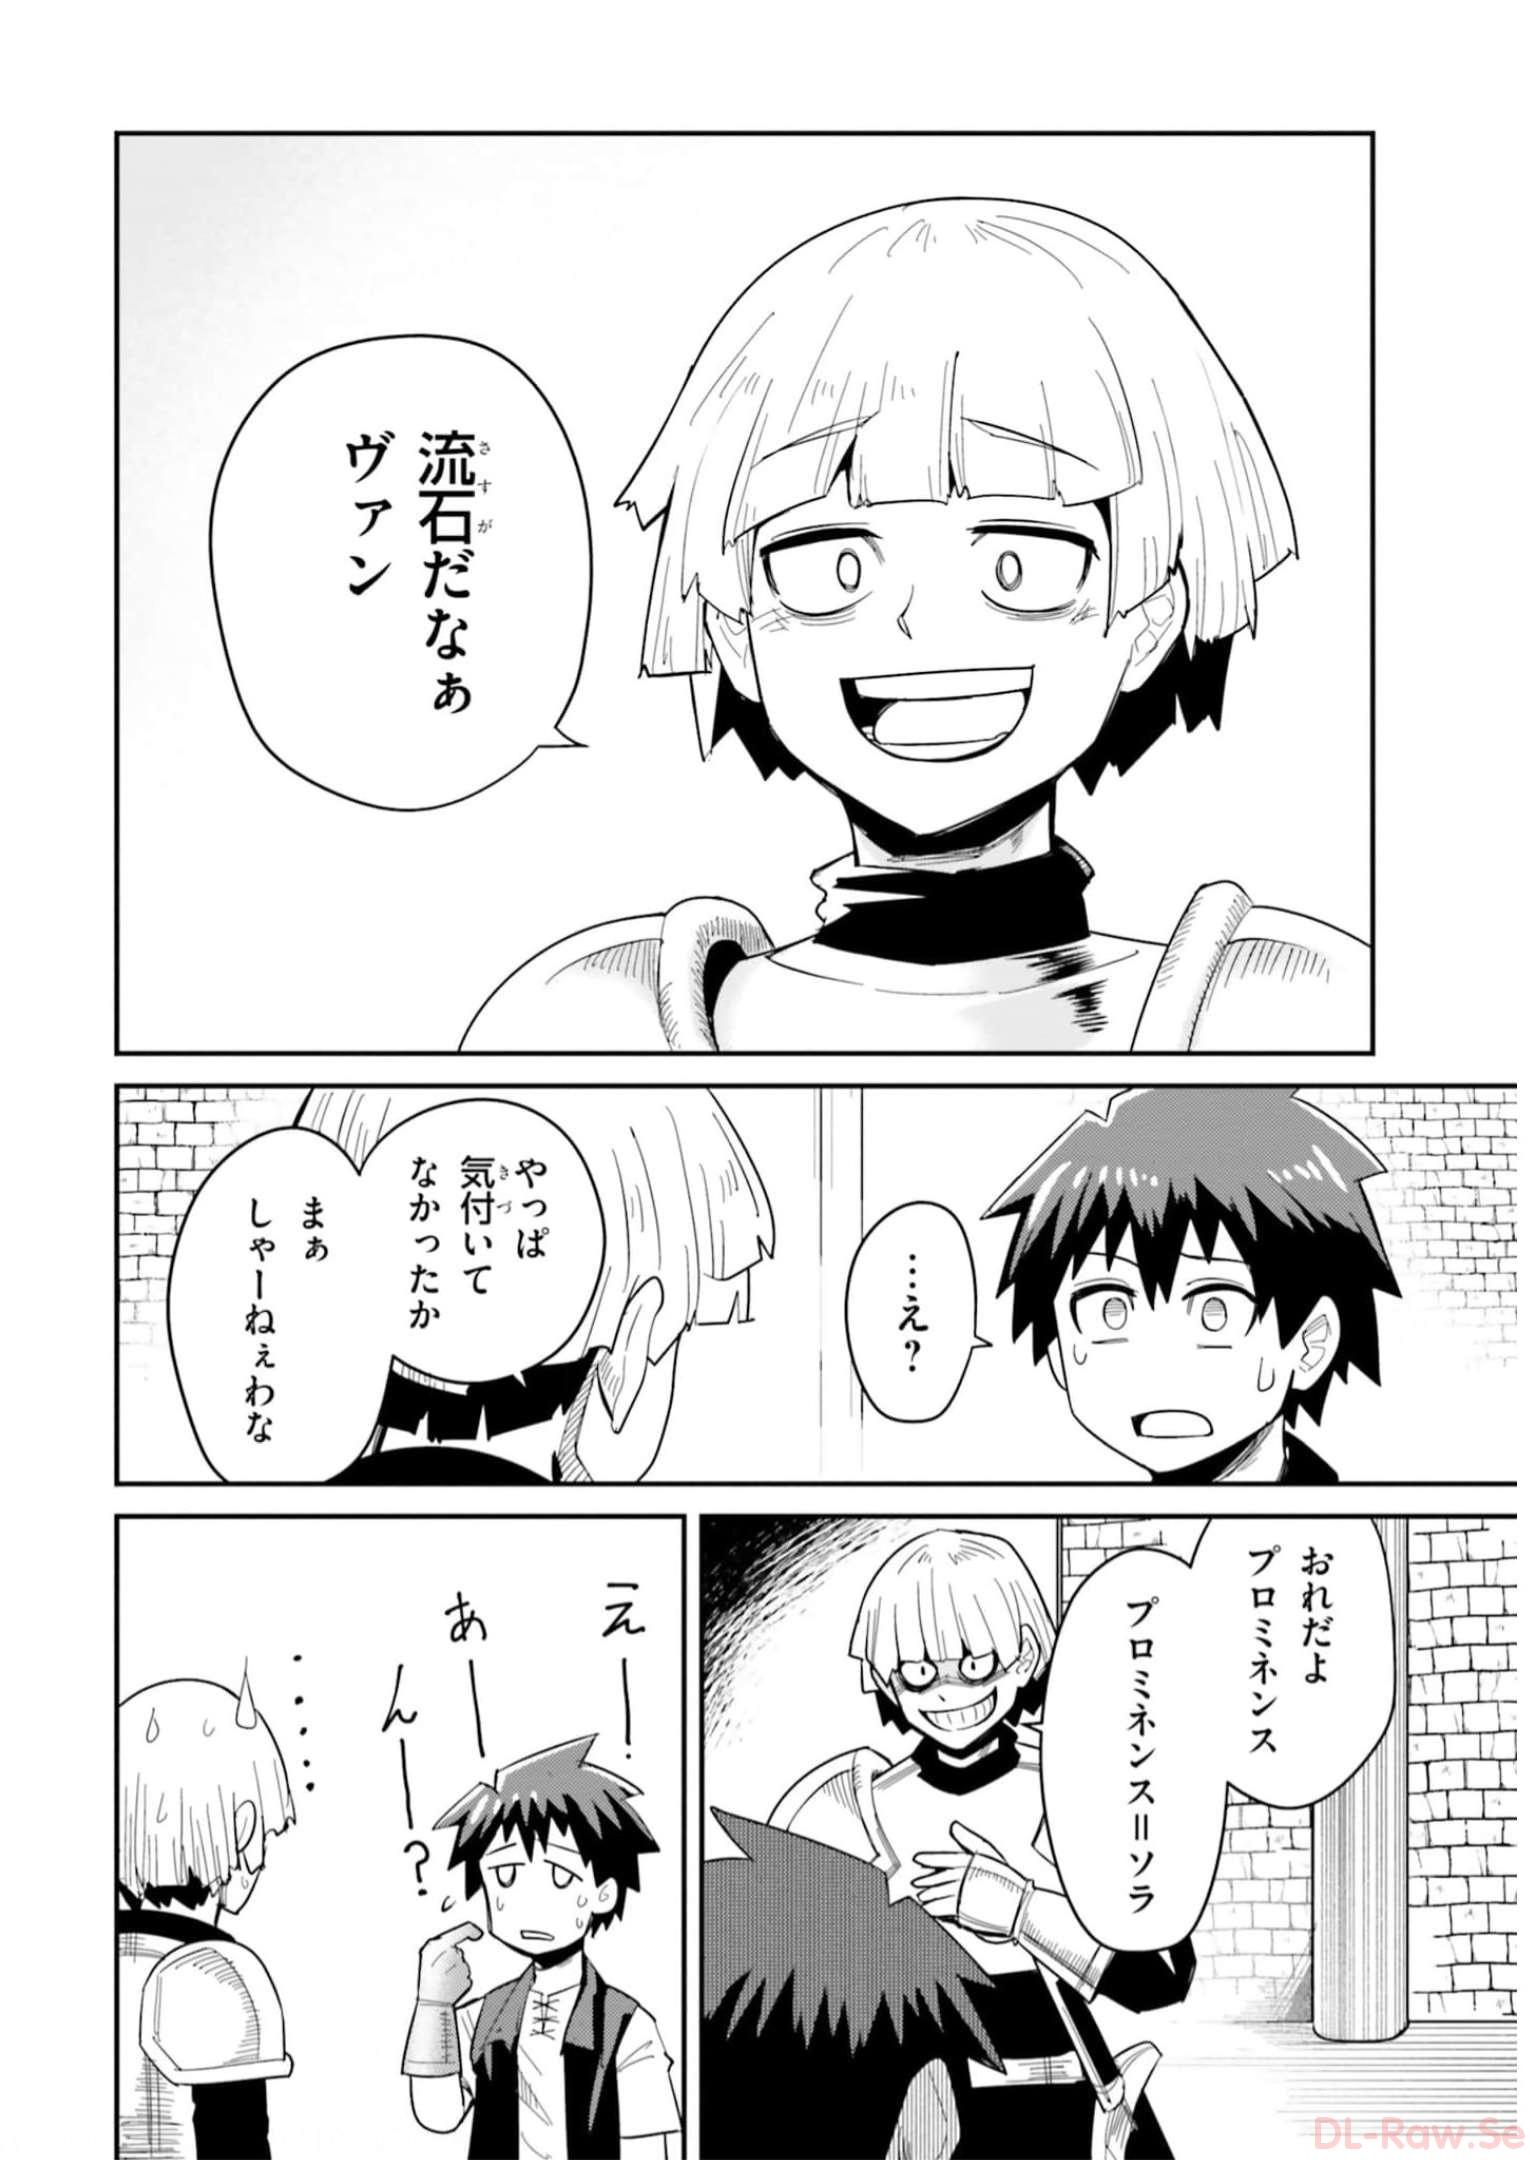 Dungeon Friends Forever Dungeon’s Childhood Friend ダンジョンの幼なじみ 第27話 - Page 15